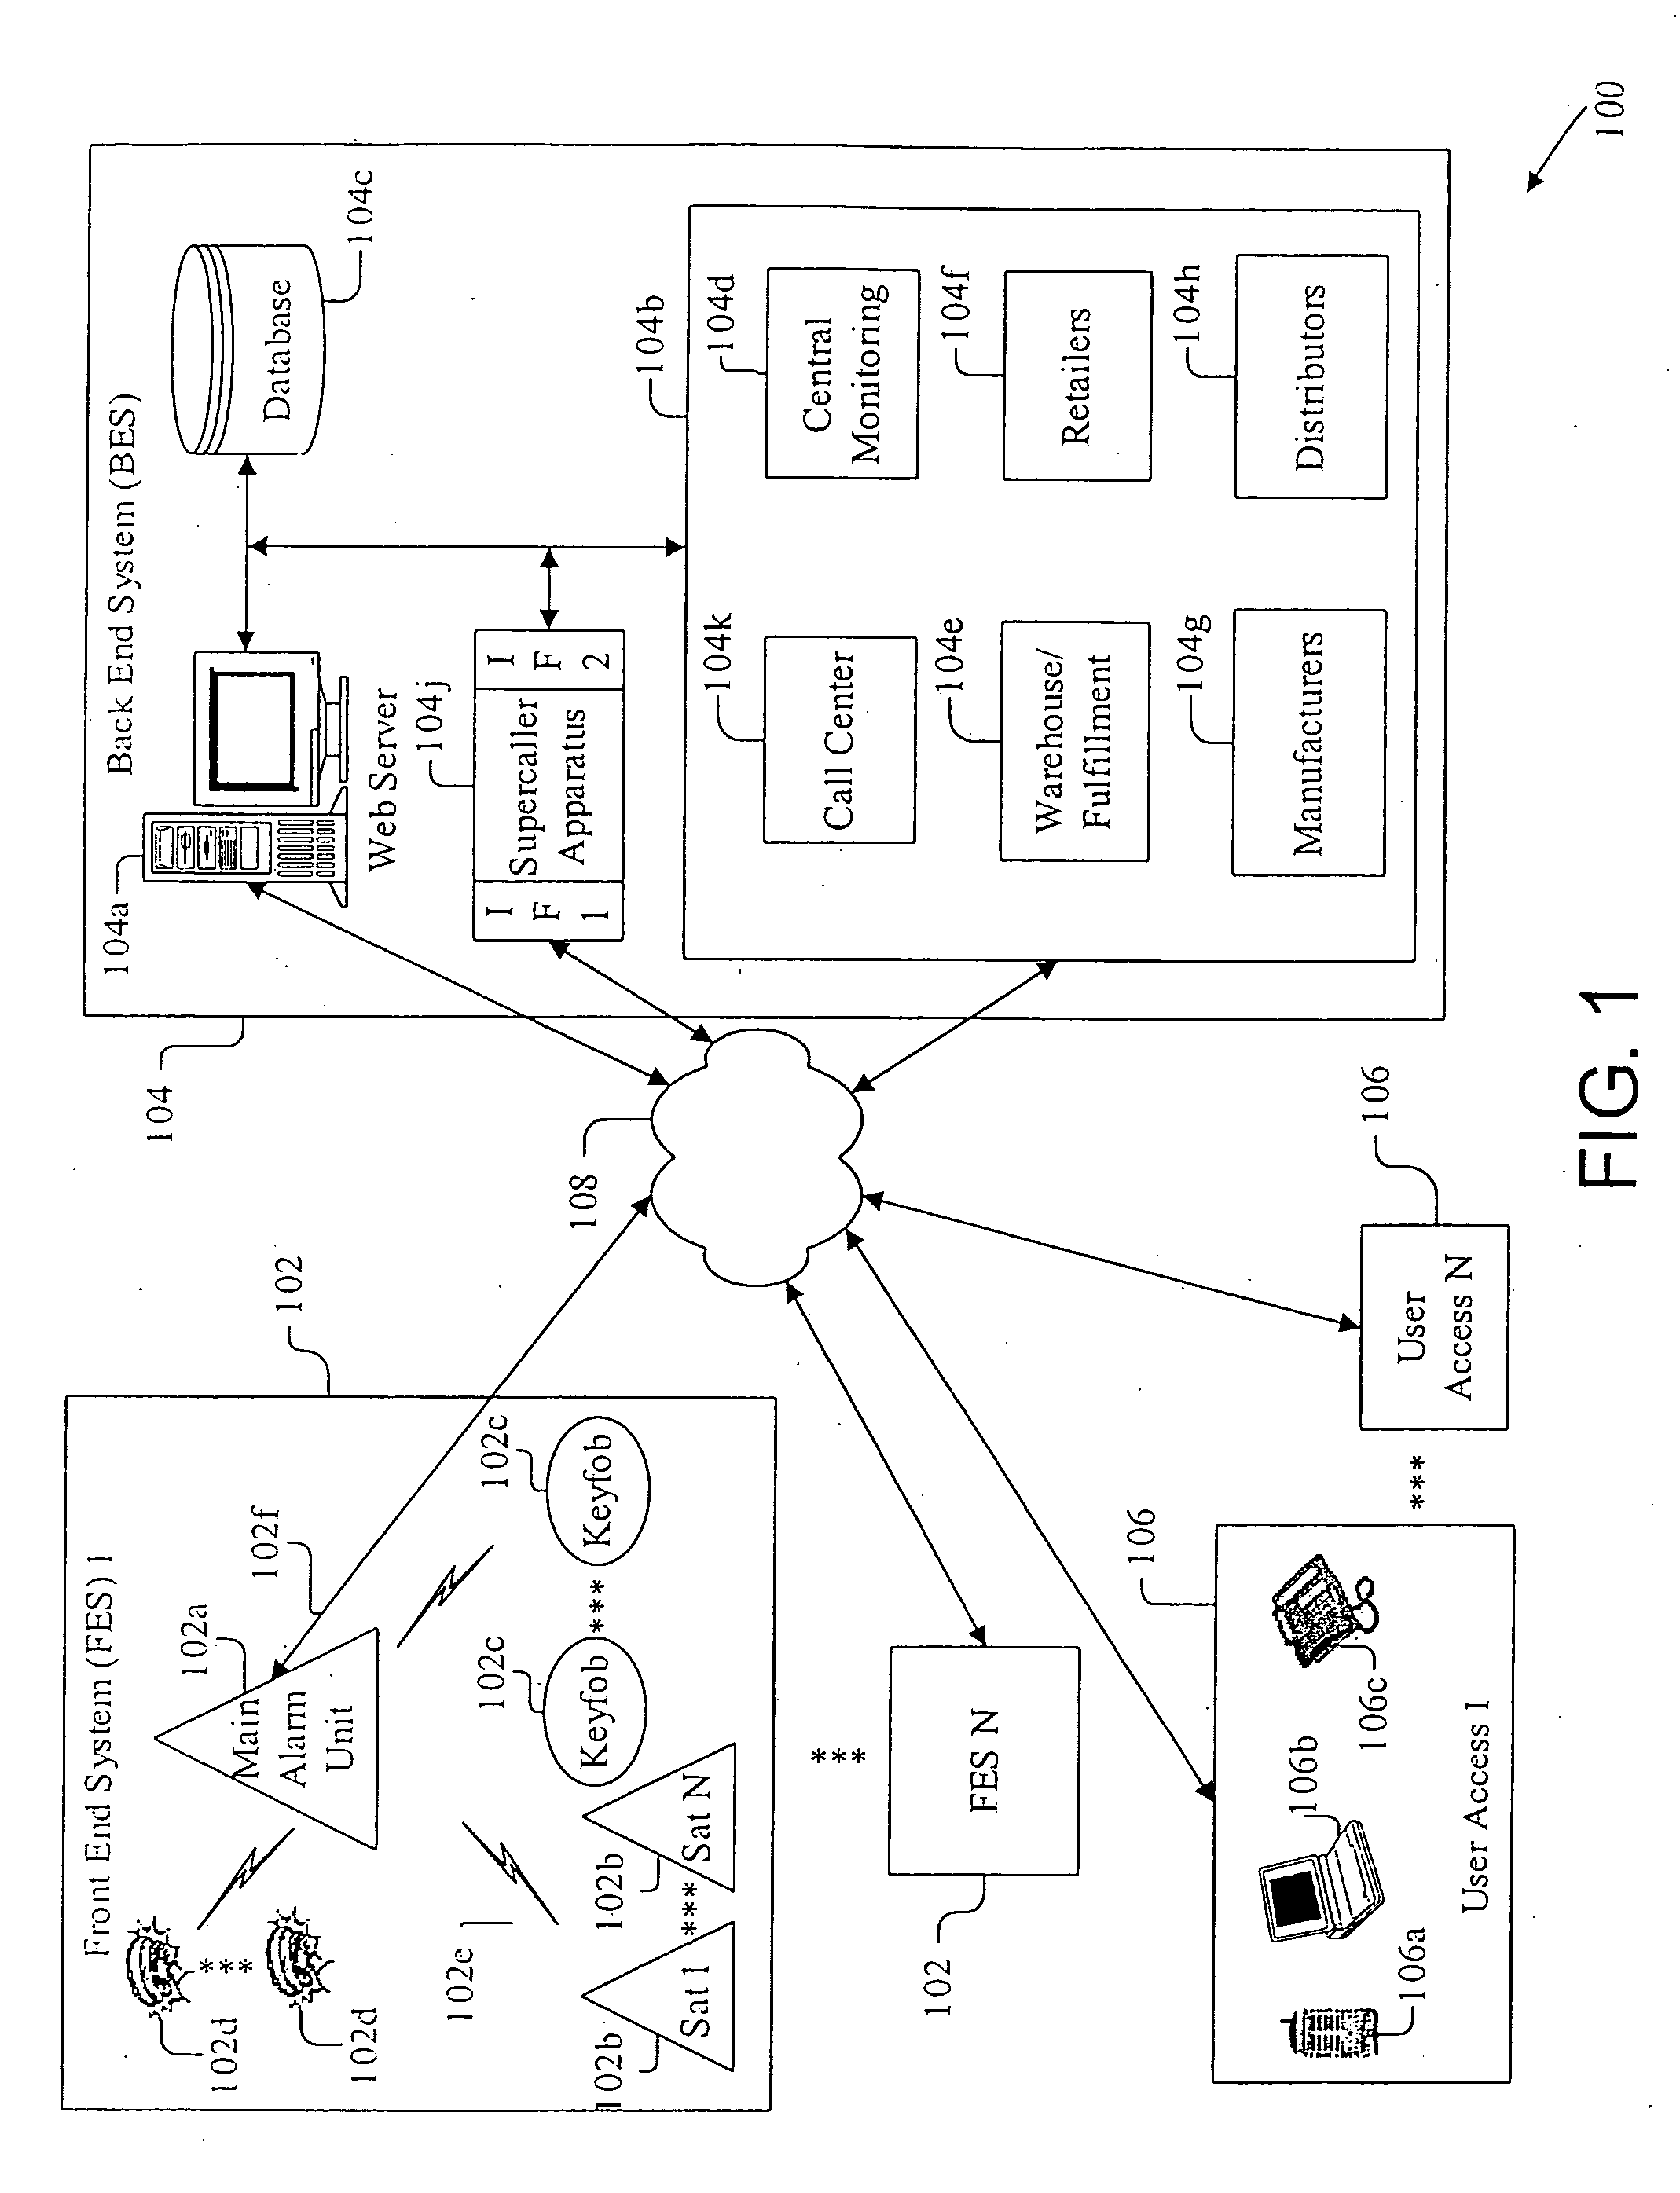 Apparatus, system, and method for alarm systems